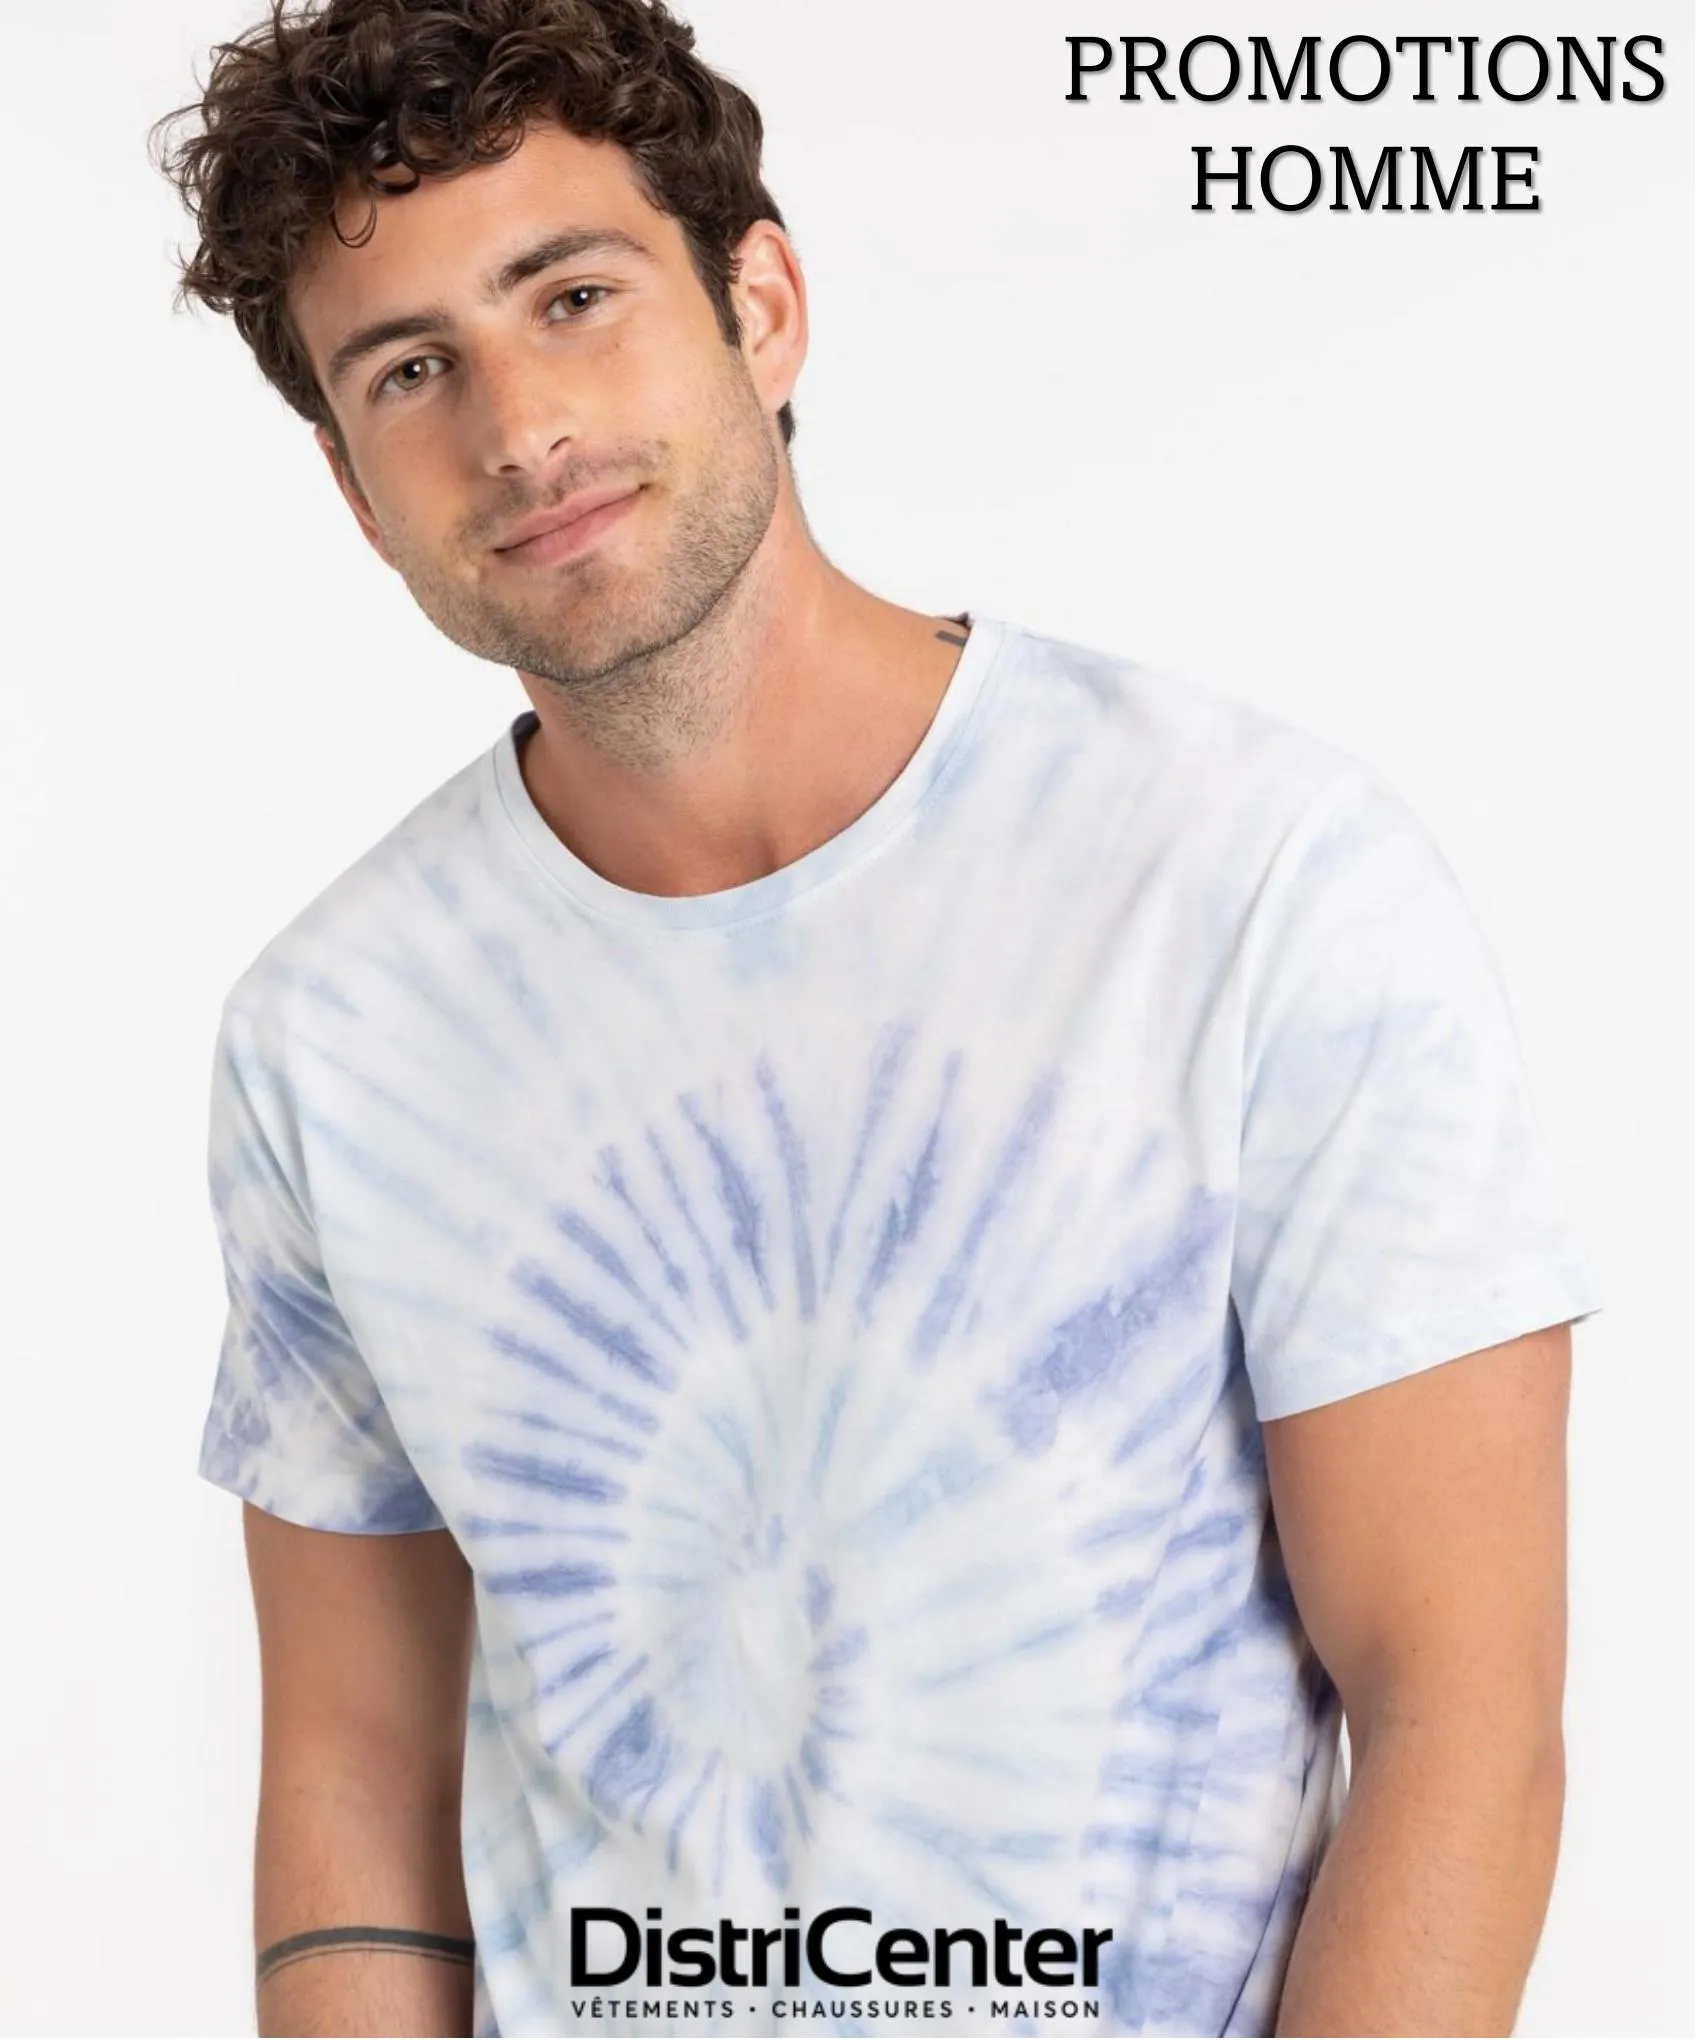 Catalogue PROMOTIONS HOMME, page 00001